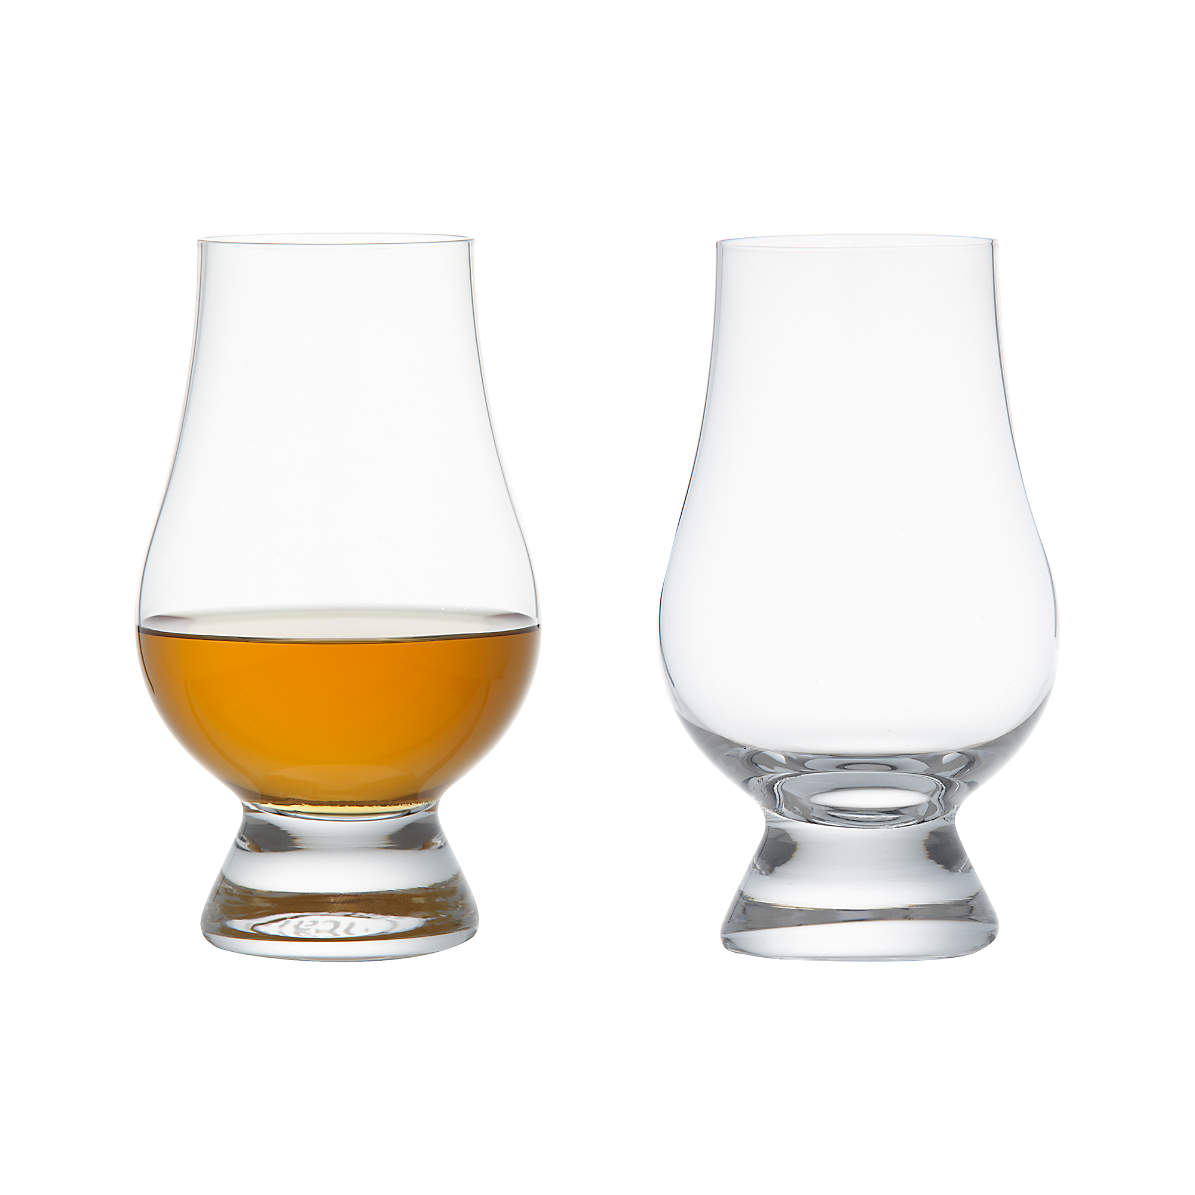 Glencairn Crystal Whiskey Glass, Set of 2 Hailed as "The Official Whiskey Glass" - image 1 of 8